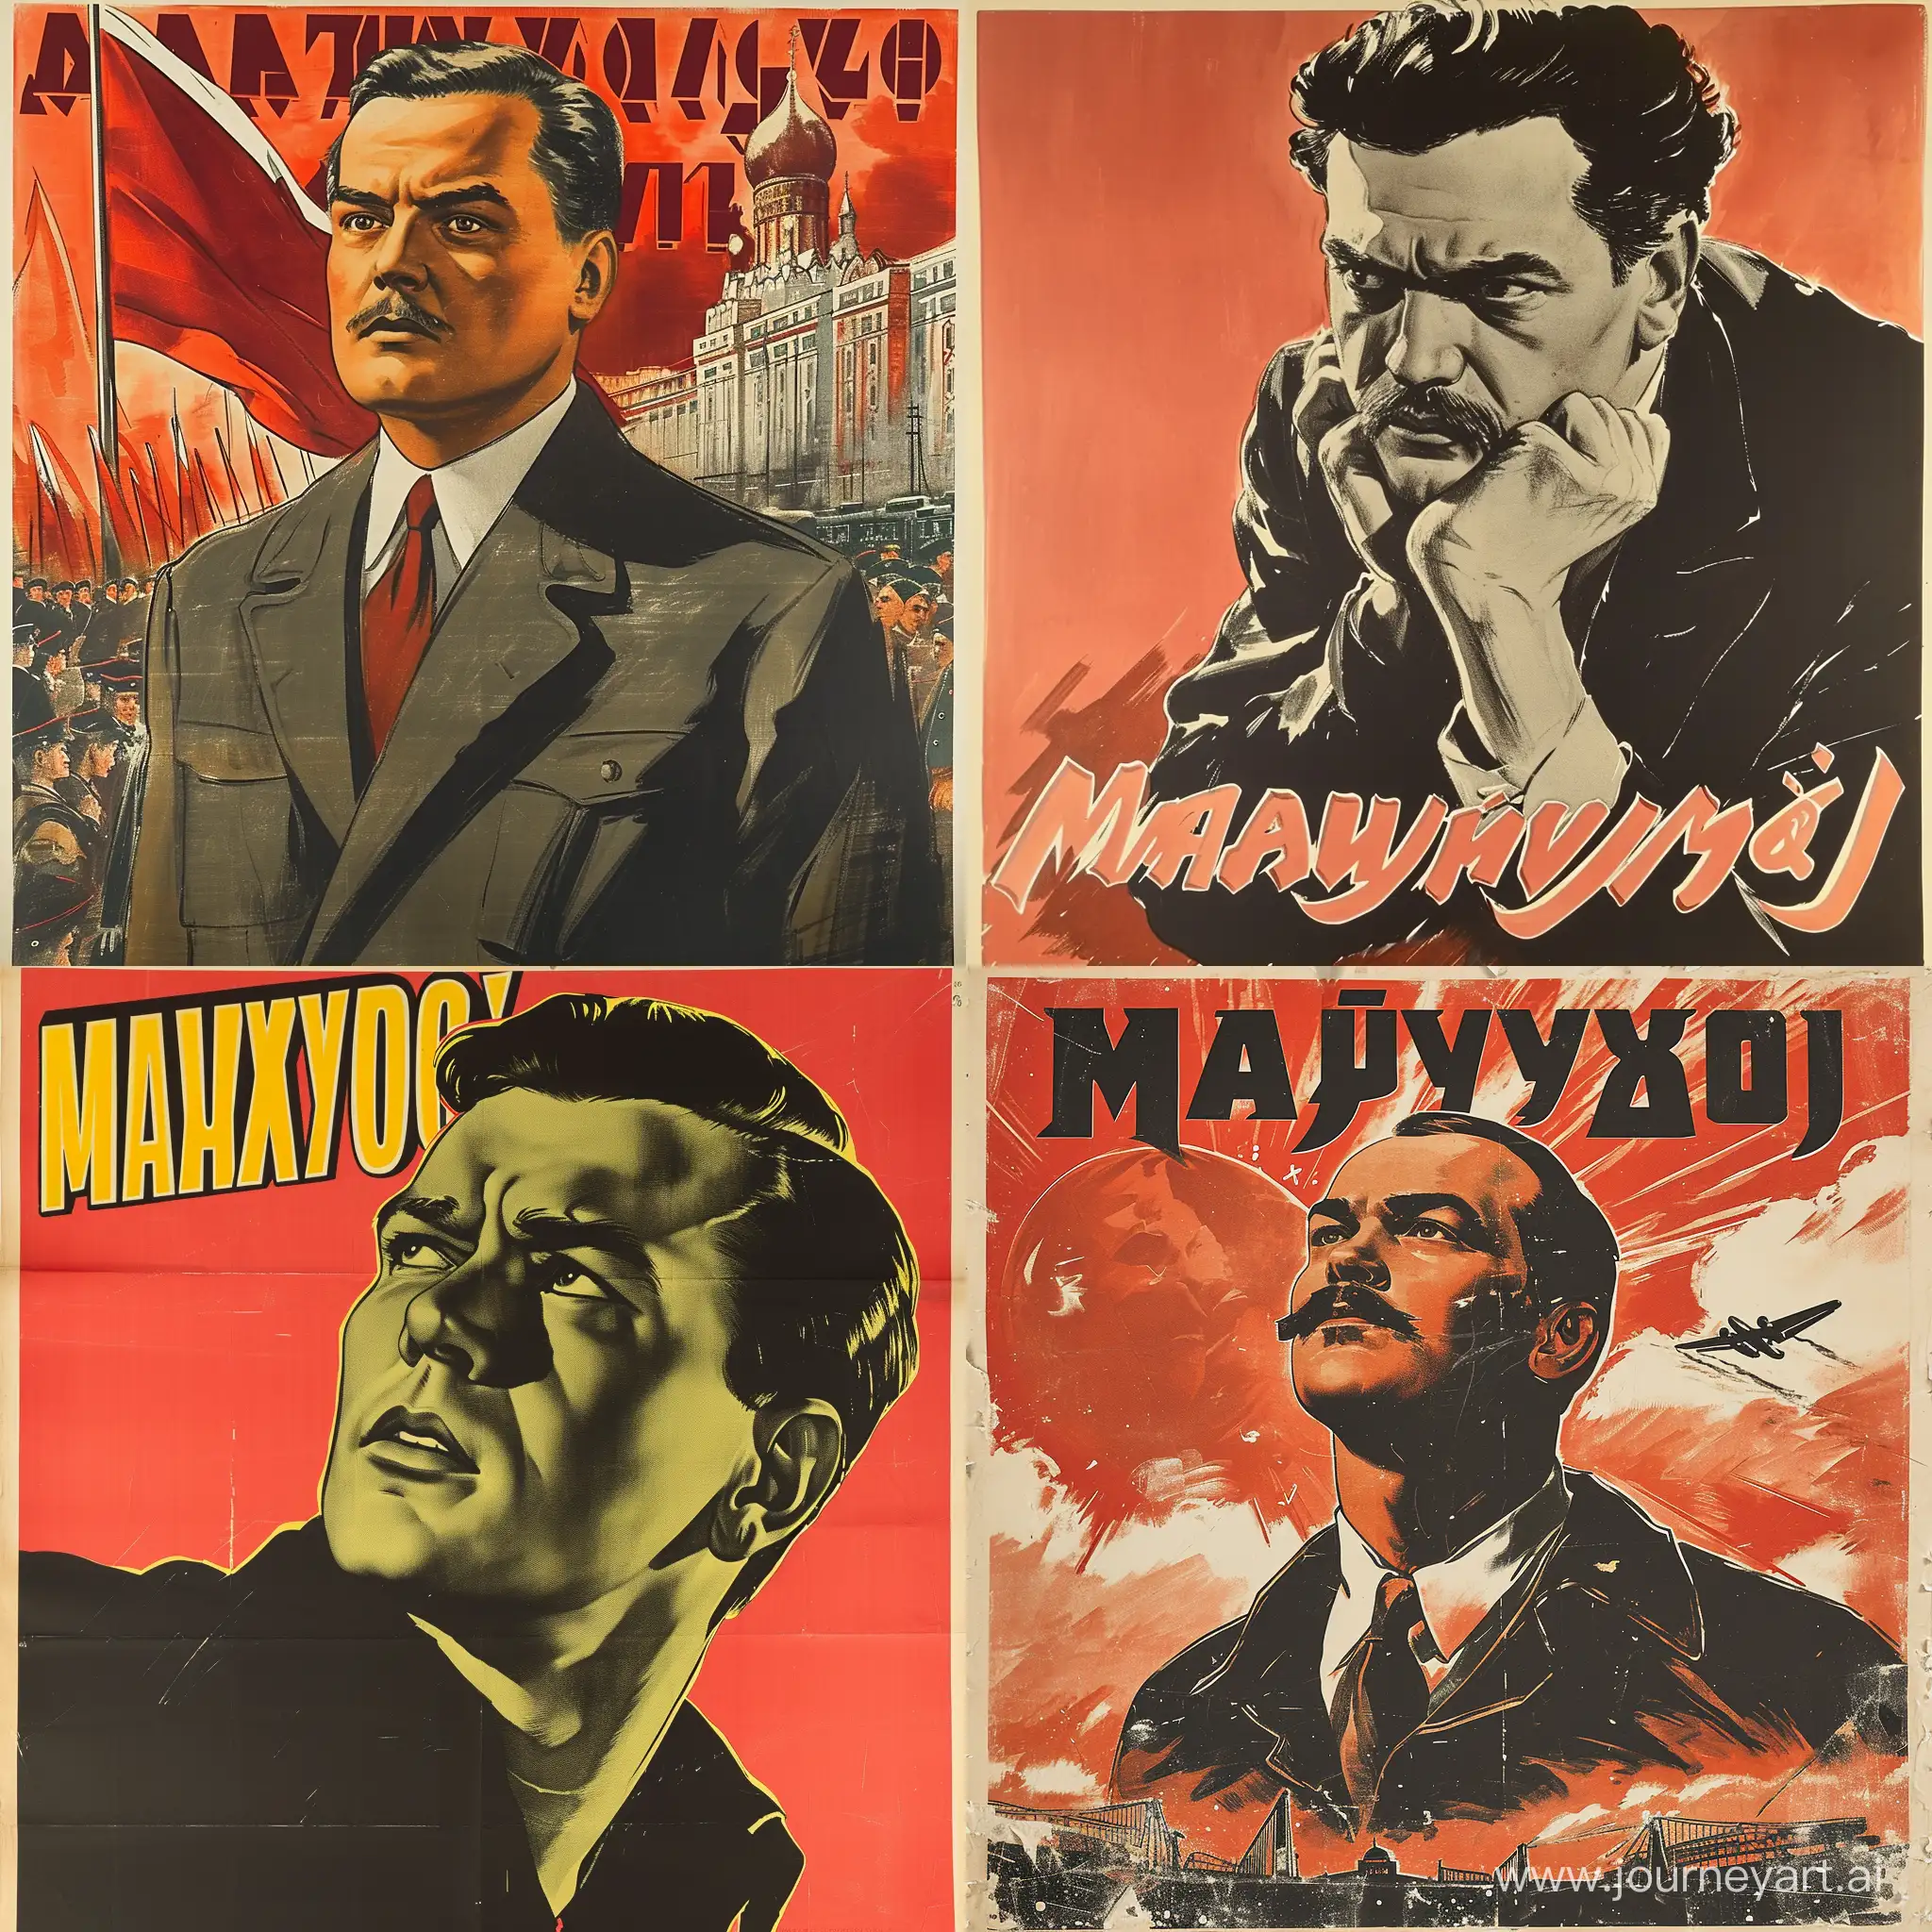 Vintage-Style-Promotional-Poster-for-Mayakovsky-1950s-Inspired